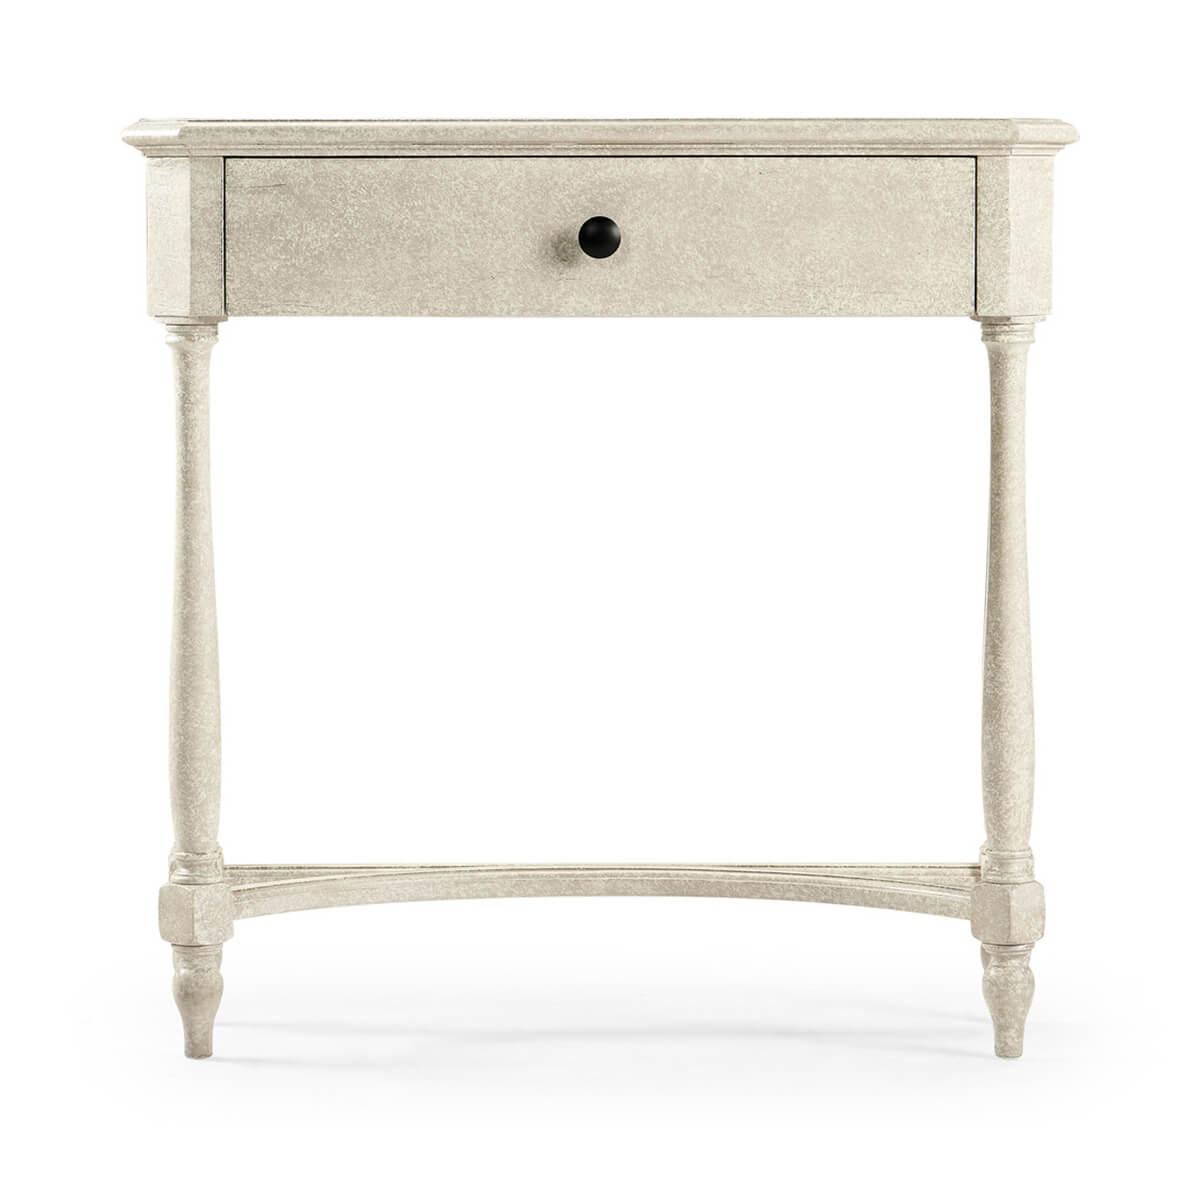 Georgian style rustic whitewash painted console table with canted corners and a molded edge top, a long single frieze drawer and raised on turned legs with a stretcher base.

Dimensions: 31